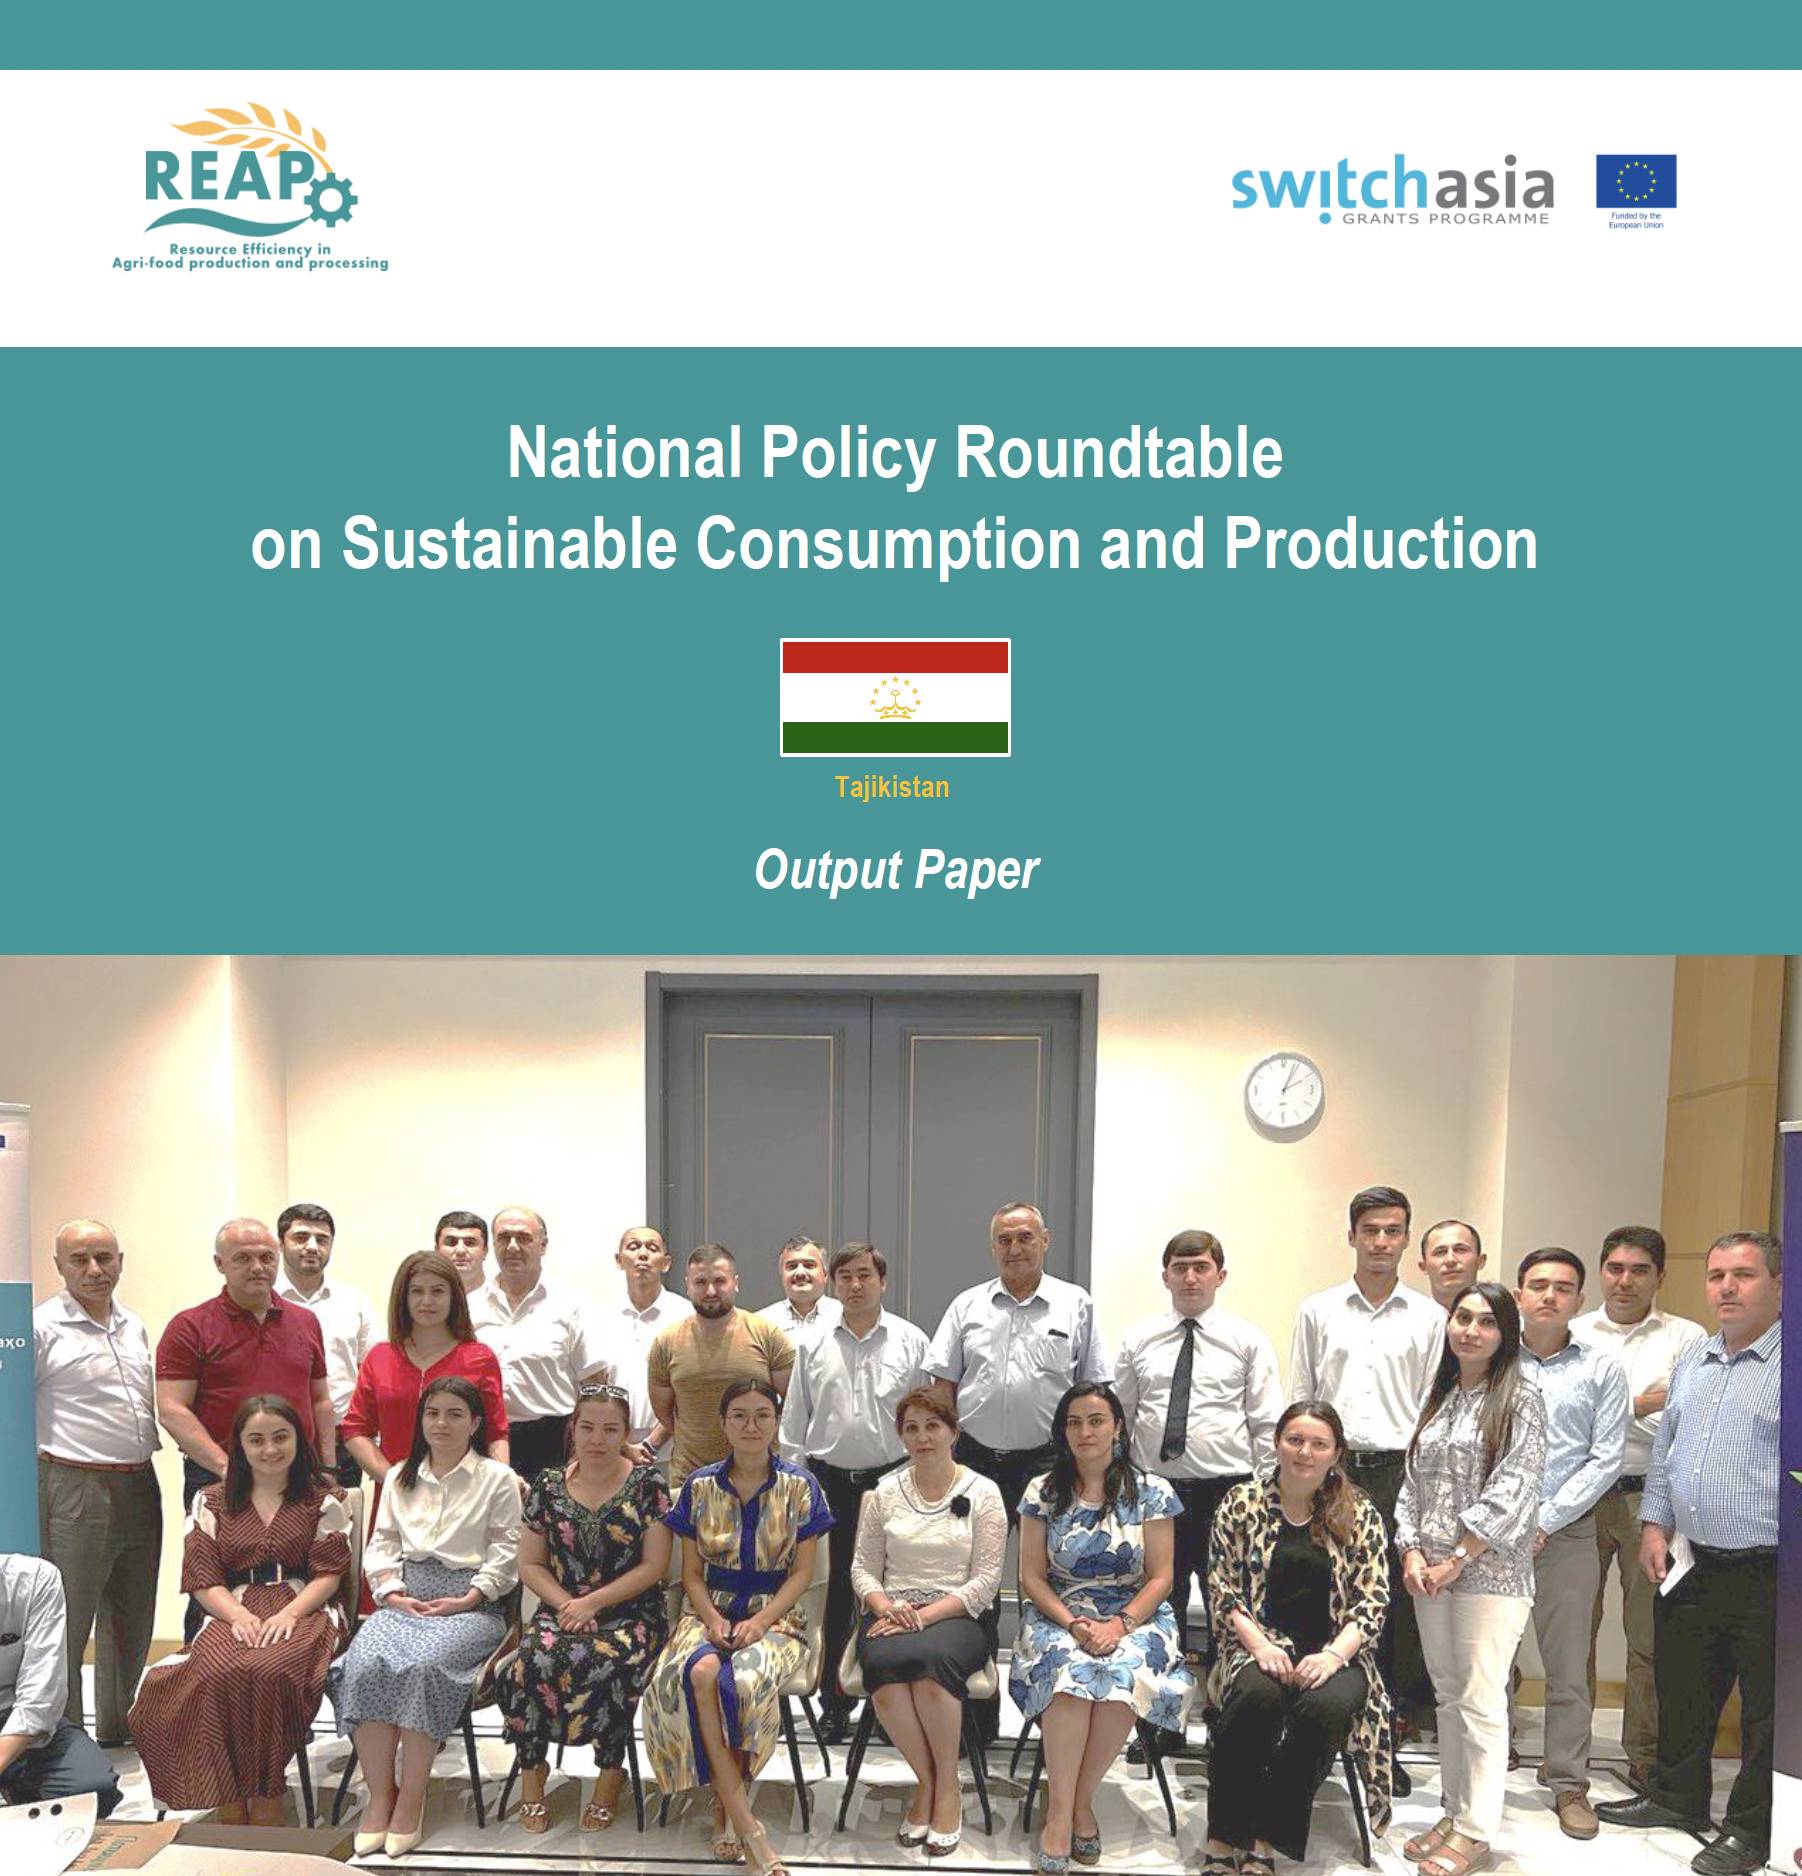 National Policy Roundtable on Sustainable Consumption and Production in Tajikistan